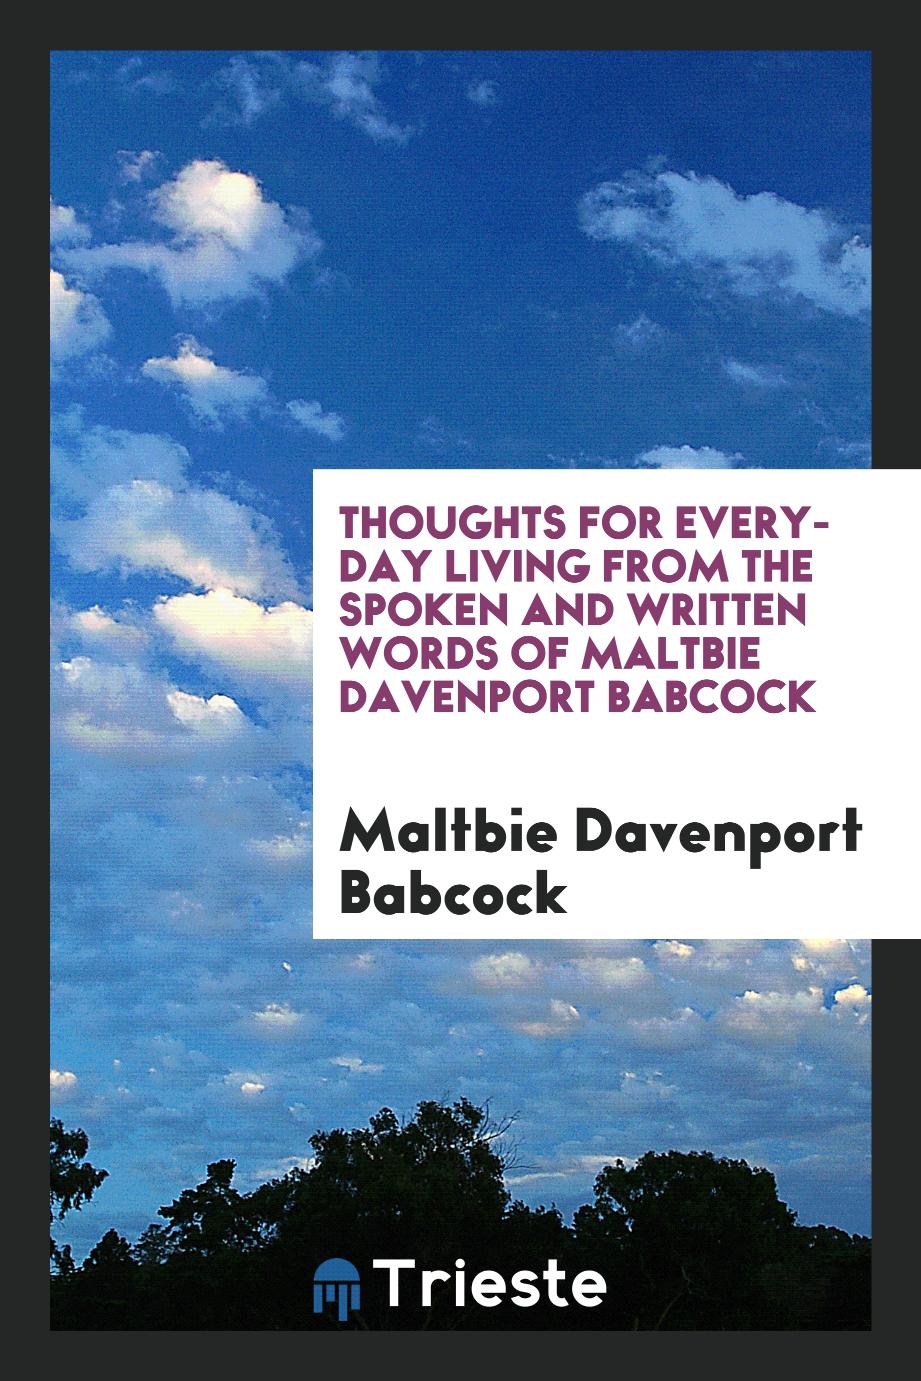 Thoughts for Every-Day Living From the Spoken and Written Words of Maltbie Davenport Babcock